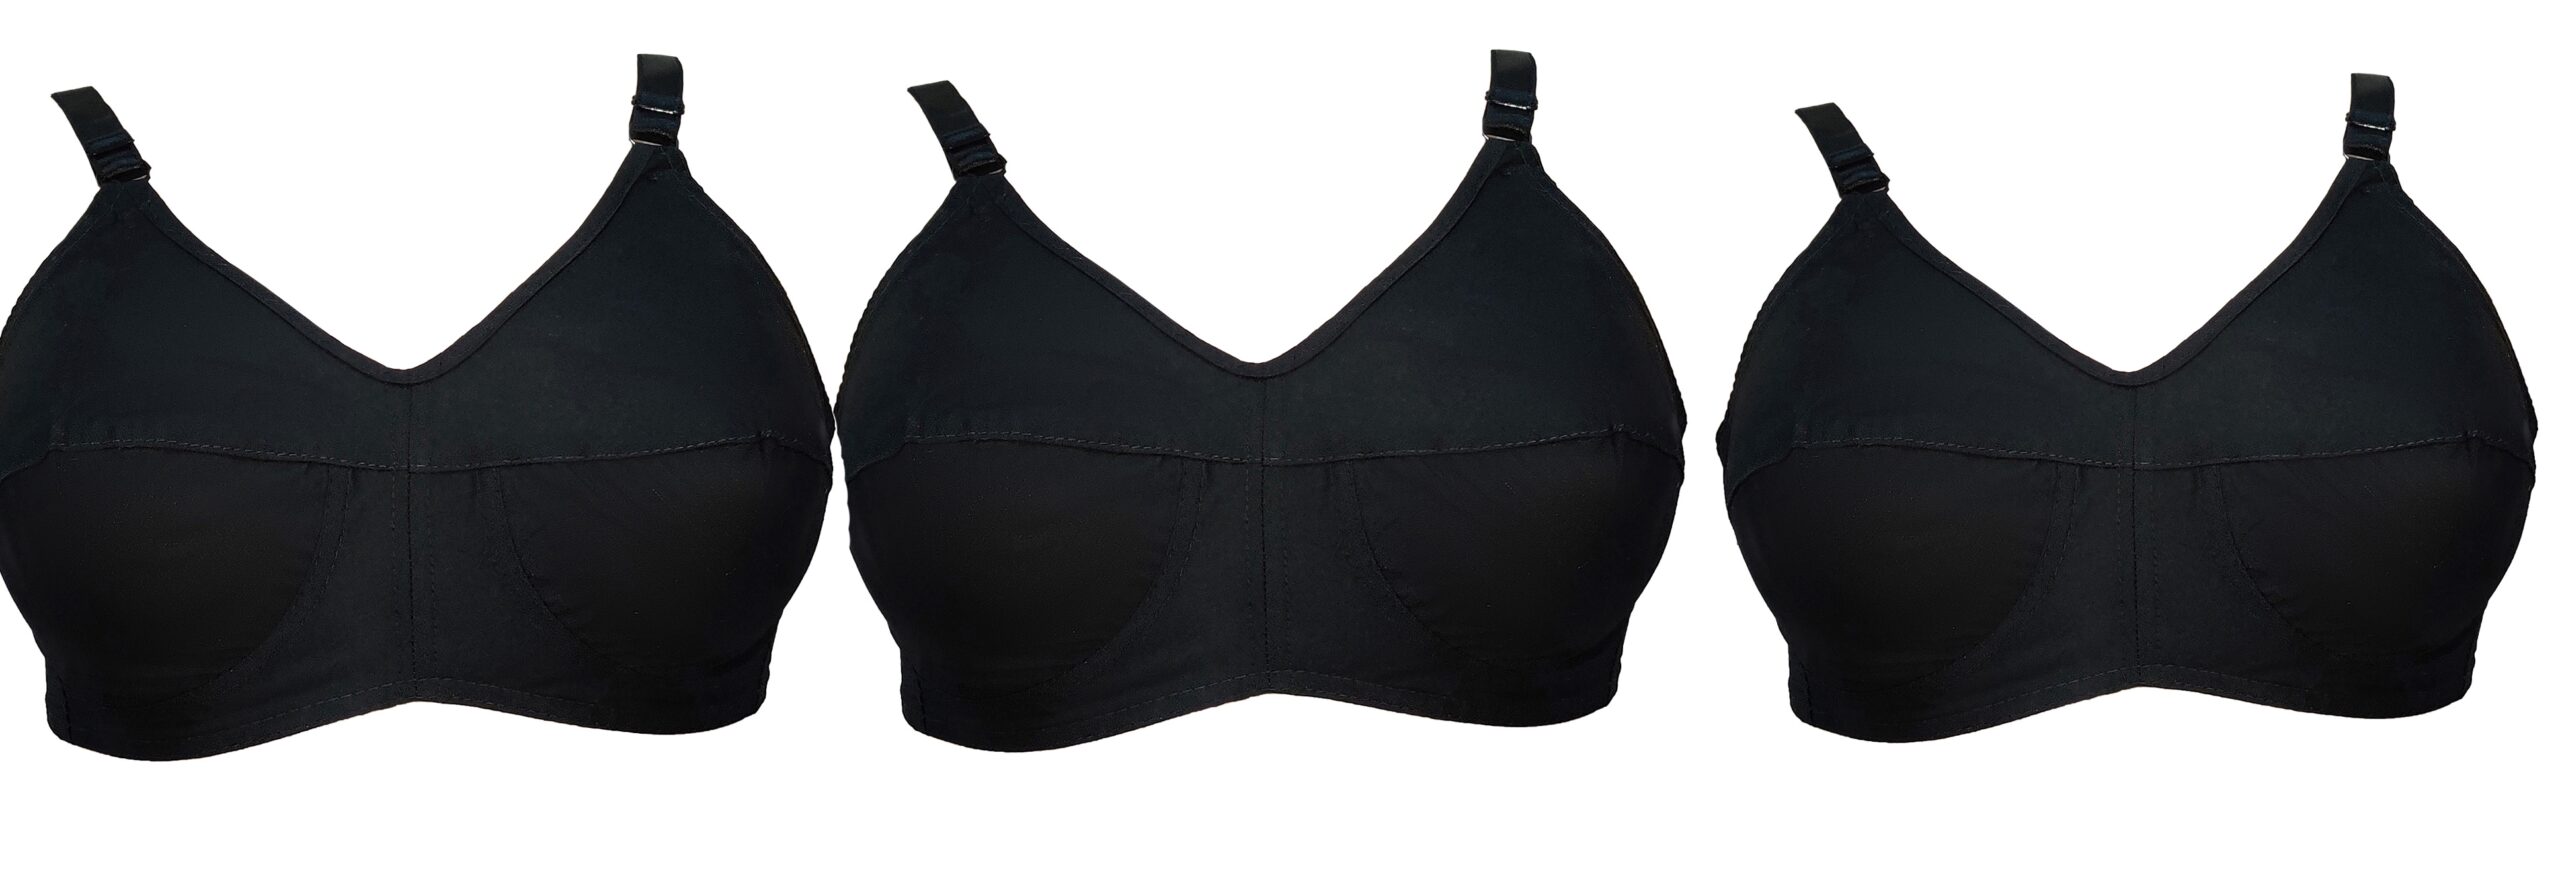 Teenagers' Cotton Black Bra Combo Pack of 3 with Lycra Straps